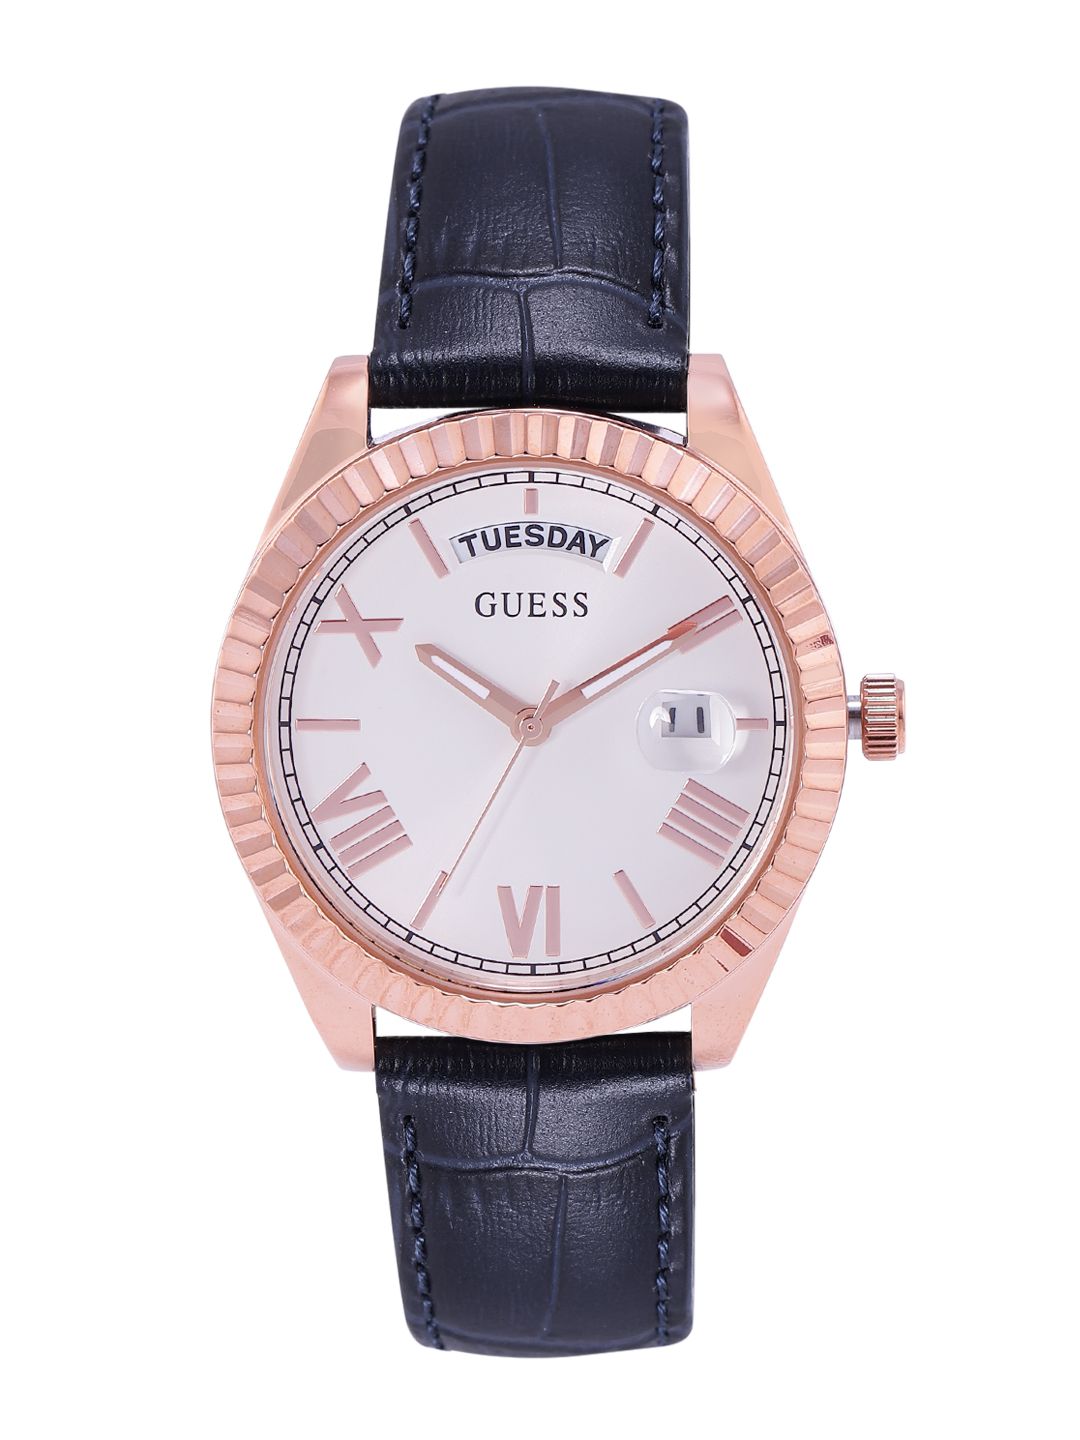 GUESS Women White Dial & Blue Leather Textured Straps Analogue Watch GW0357L3 Price in India